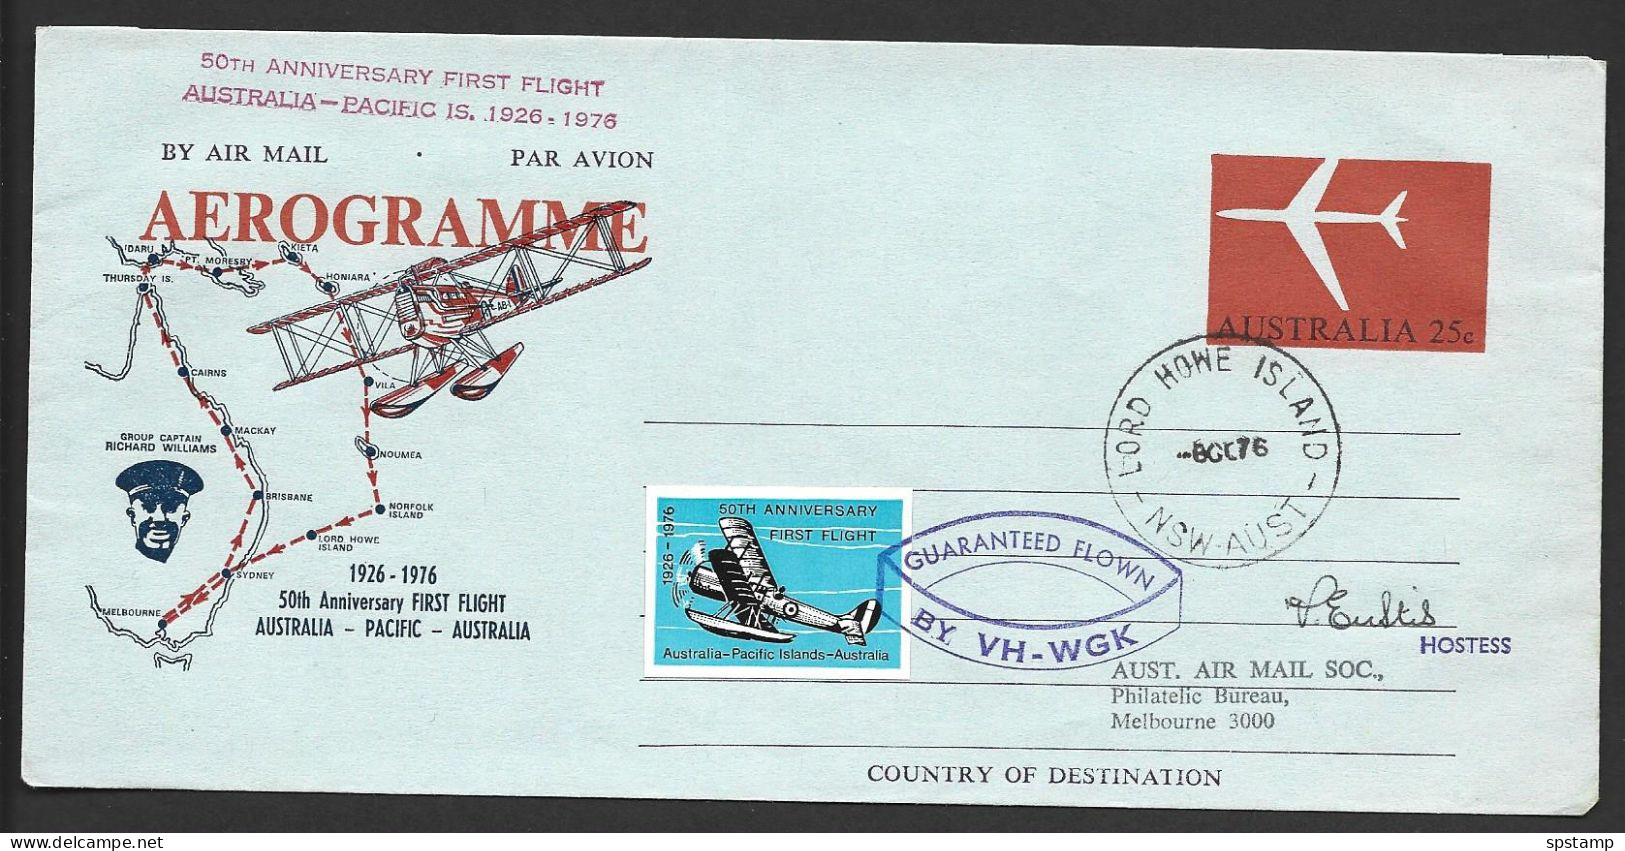 Australia 1976 Aerogramme Used Lord Howe Island To Melbourne, Carried On 1926 First Pacific RAAF Flight Re-enactment - Aérogrammes